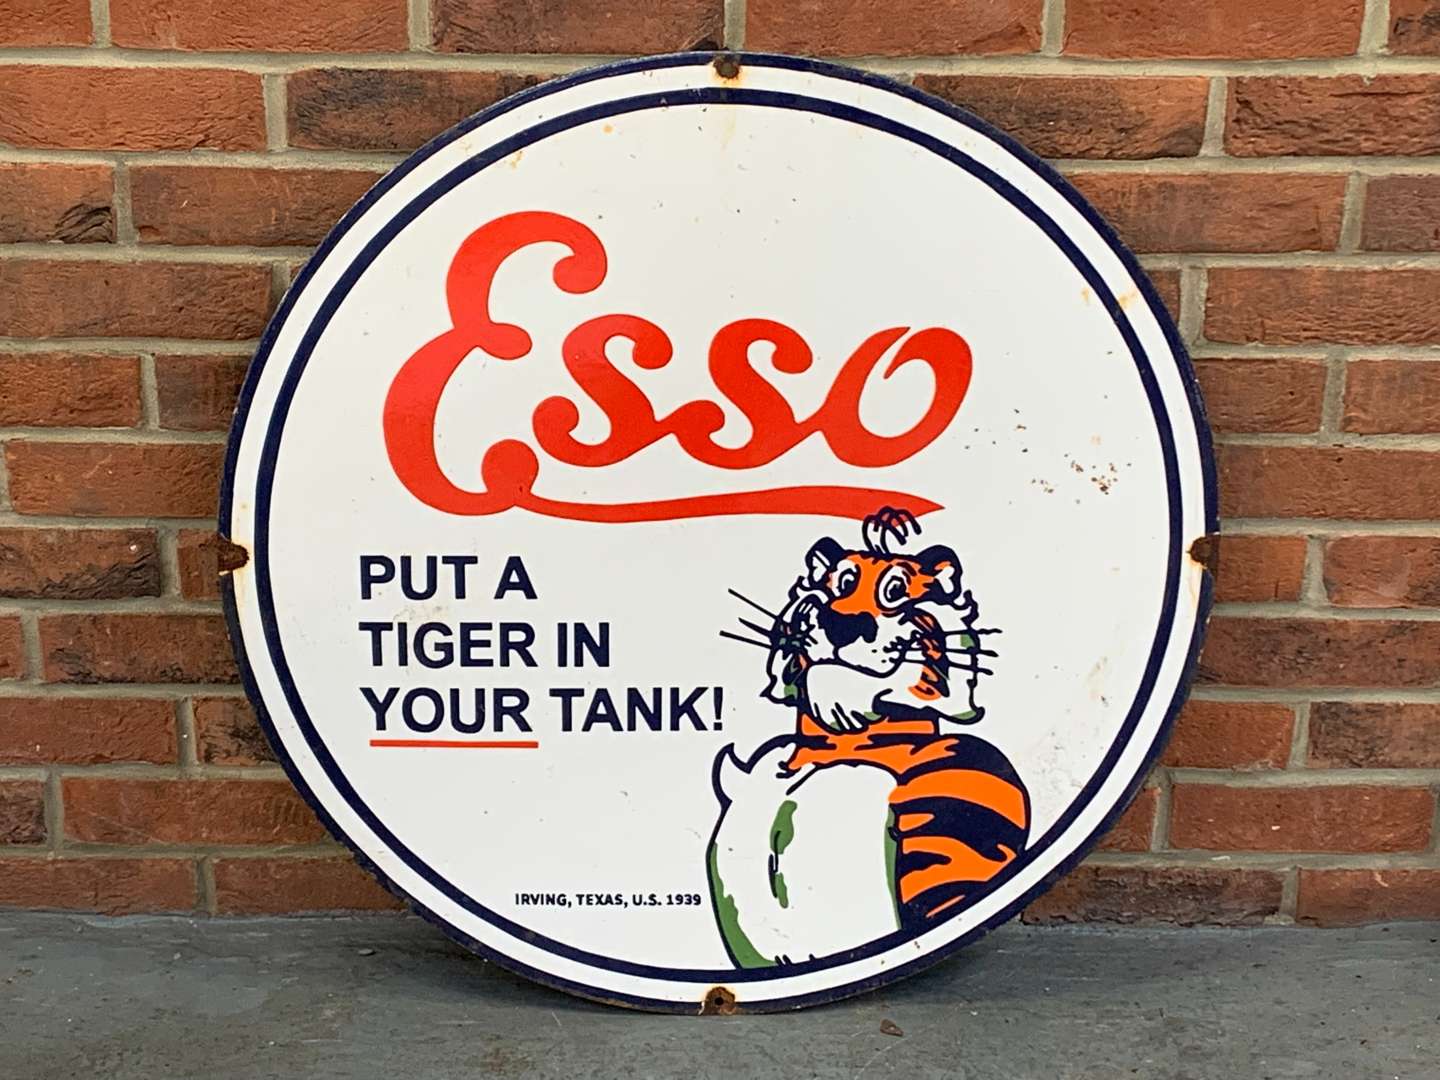 <p>Esso “Put a Tiger in Your Tank” Circular Enamel Sign</p>